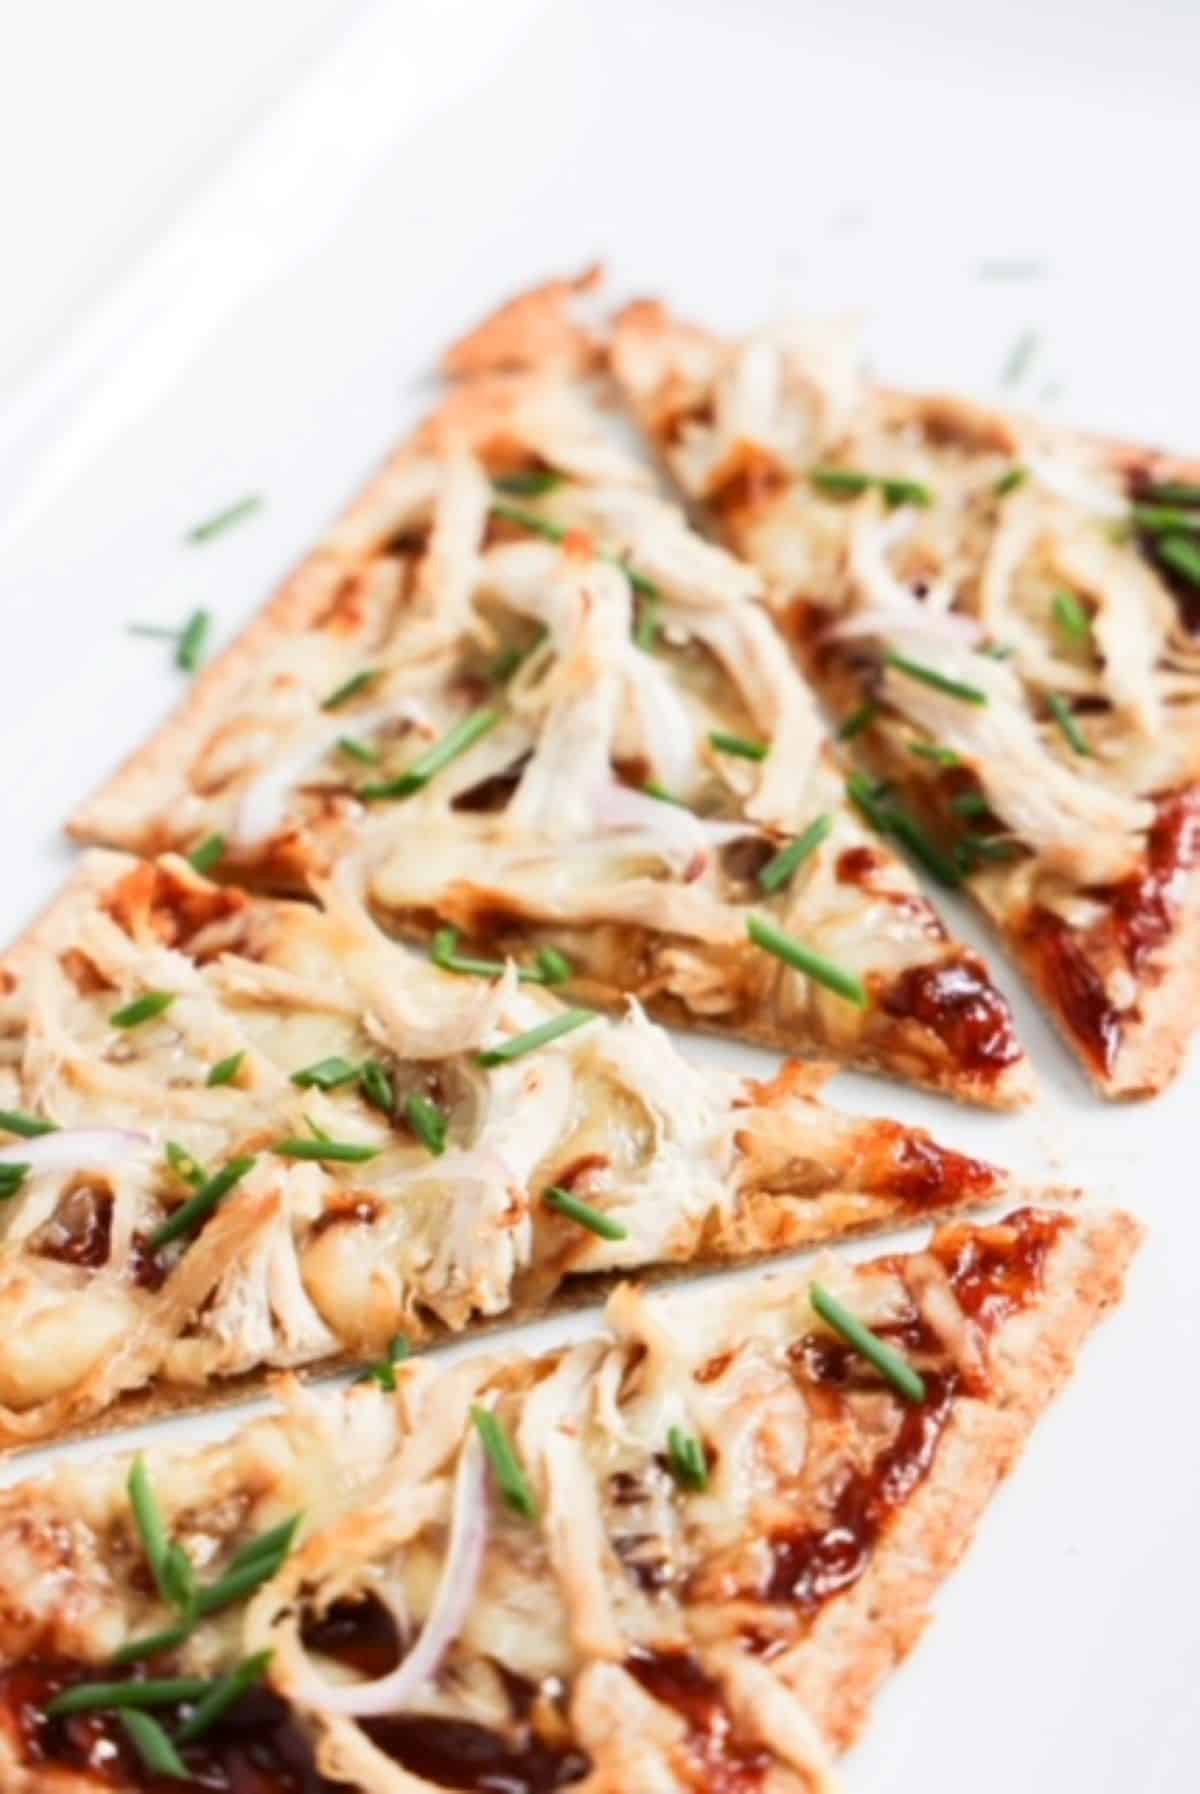 One bbq chicken flatbread topped with chopped green onion and sliced into four pieces.